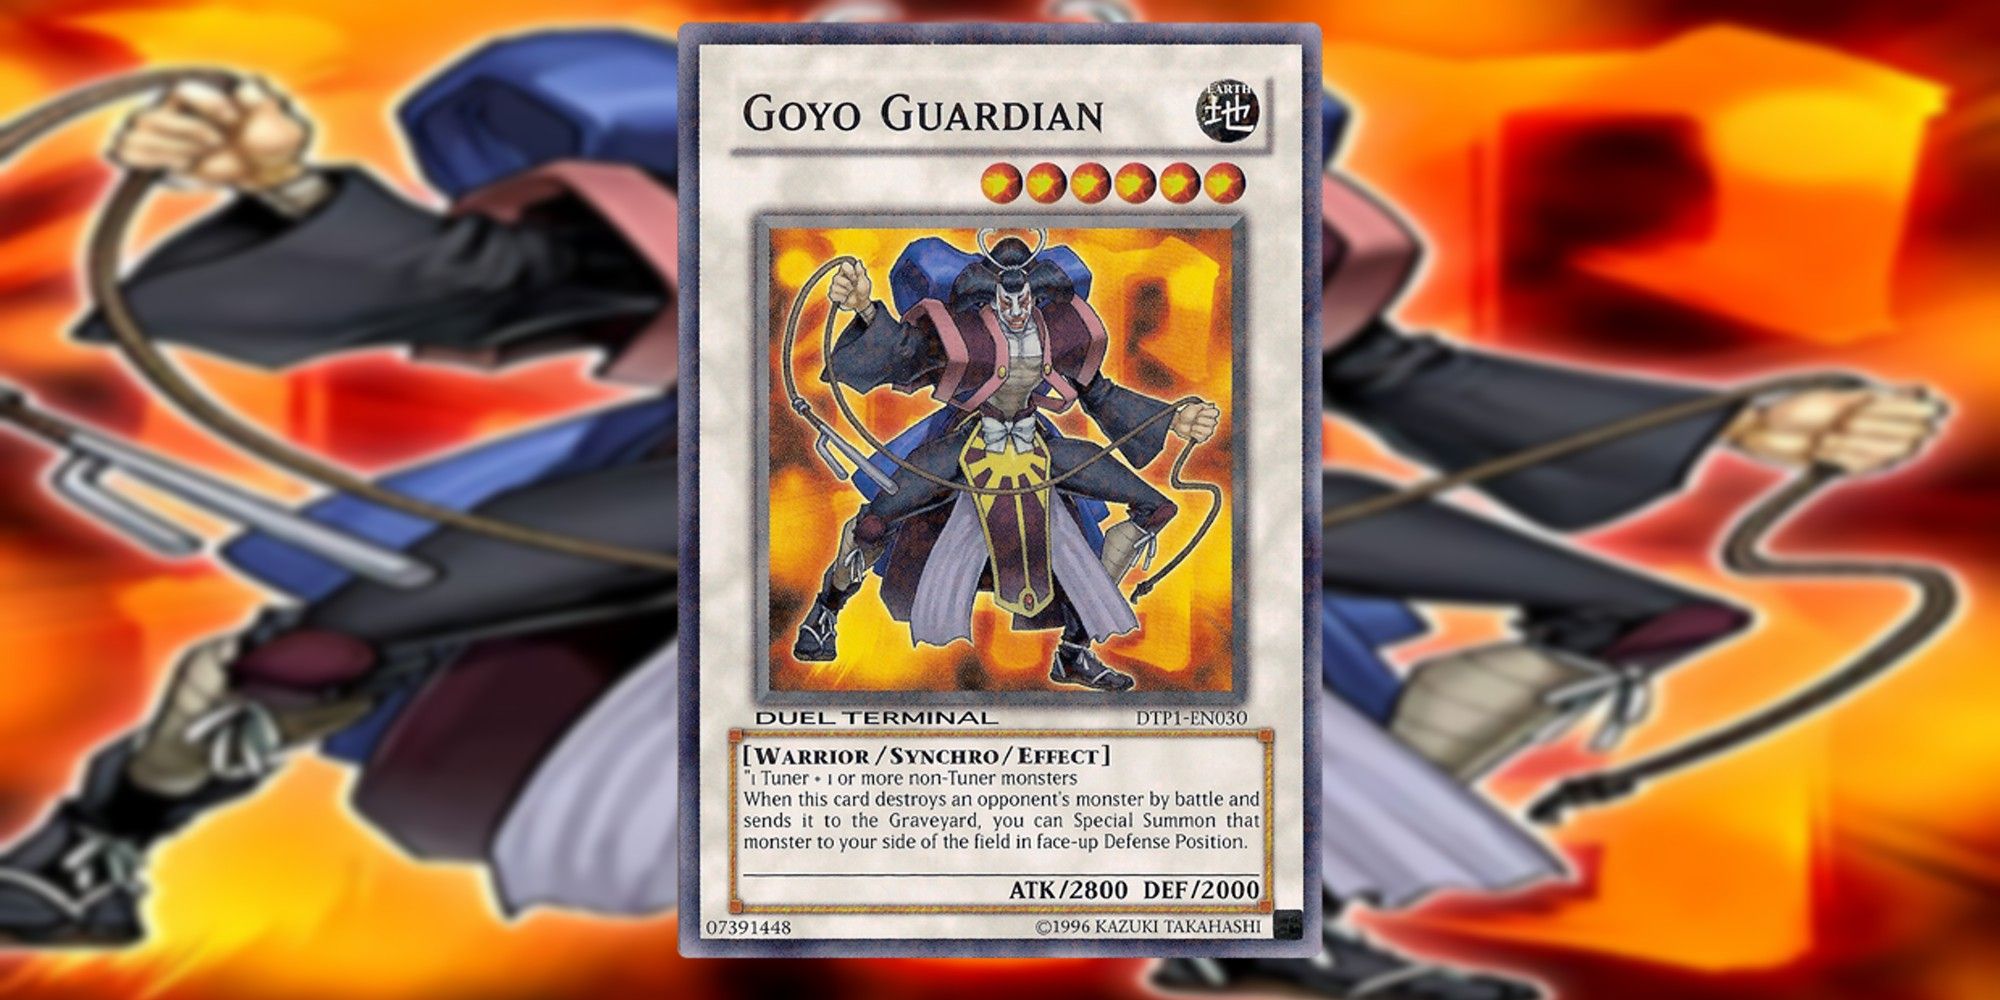 Goyo Guardian card and art background